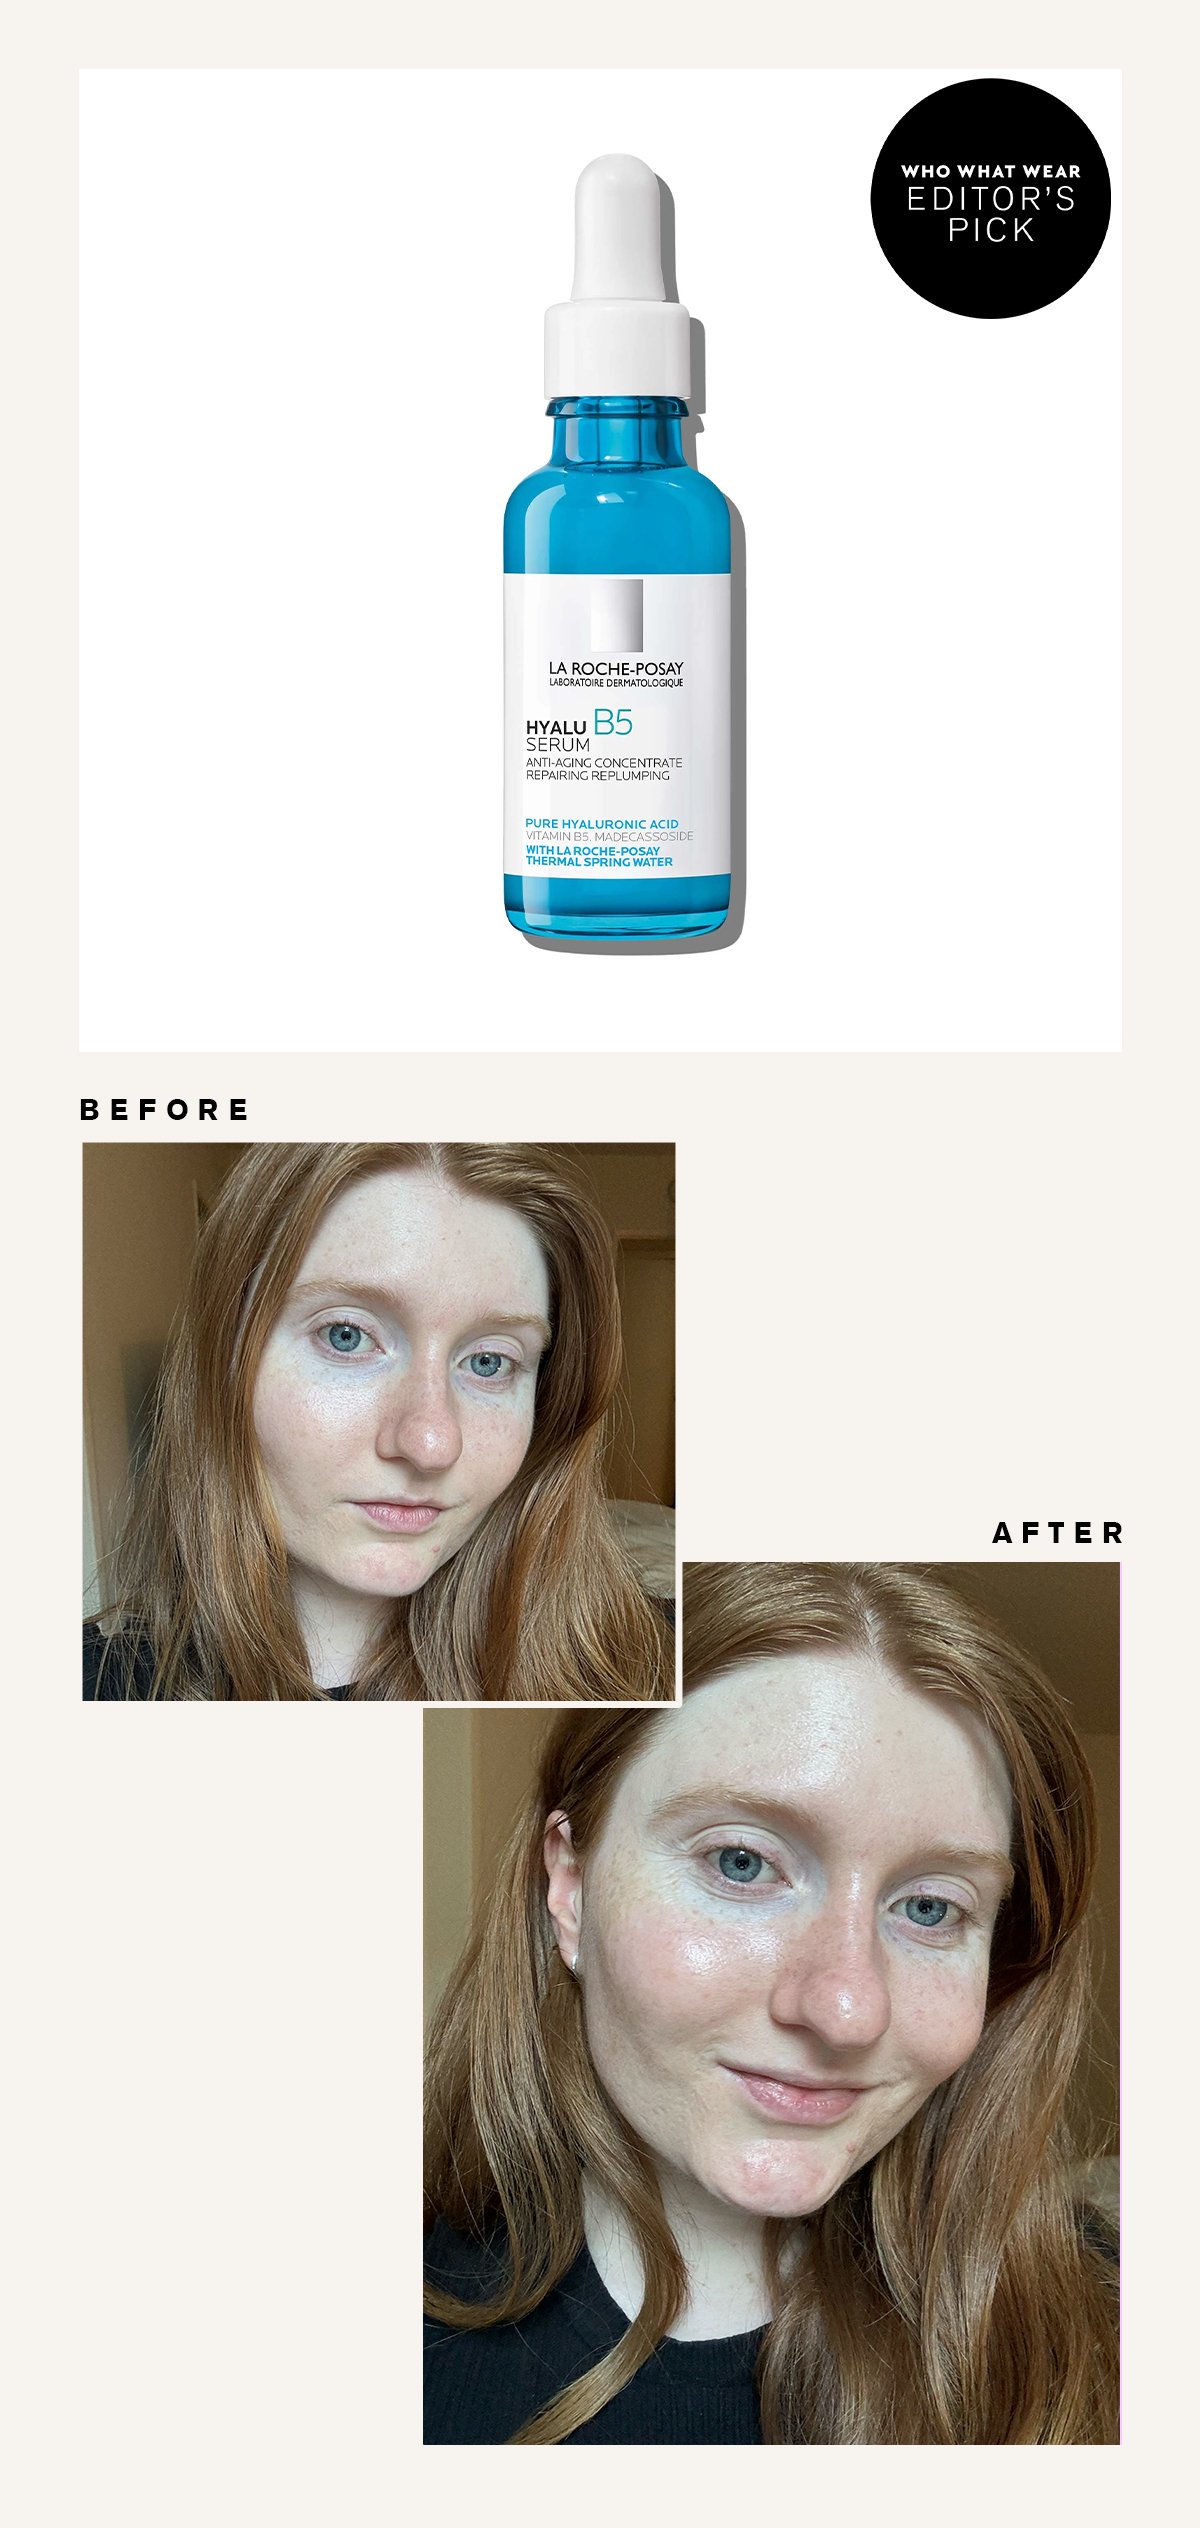 La Roche-Posay Hyaluronic Acid Serum: Before and After Picture